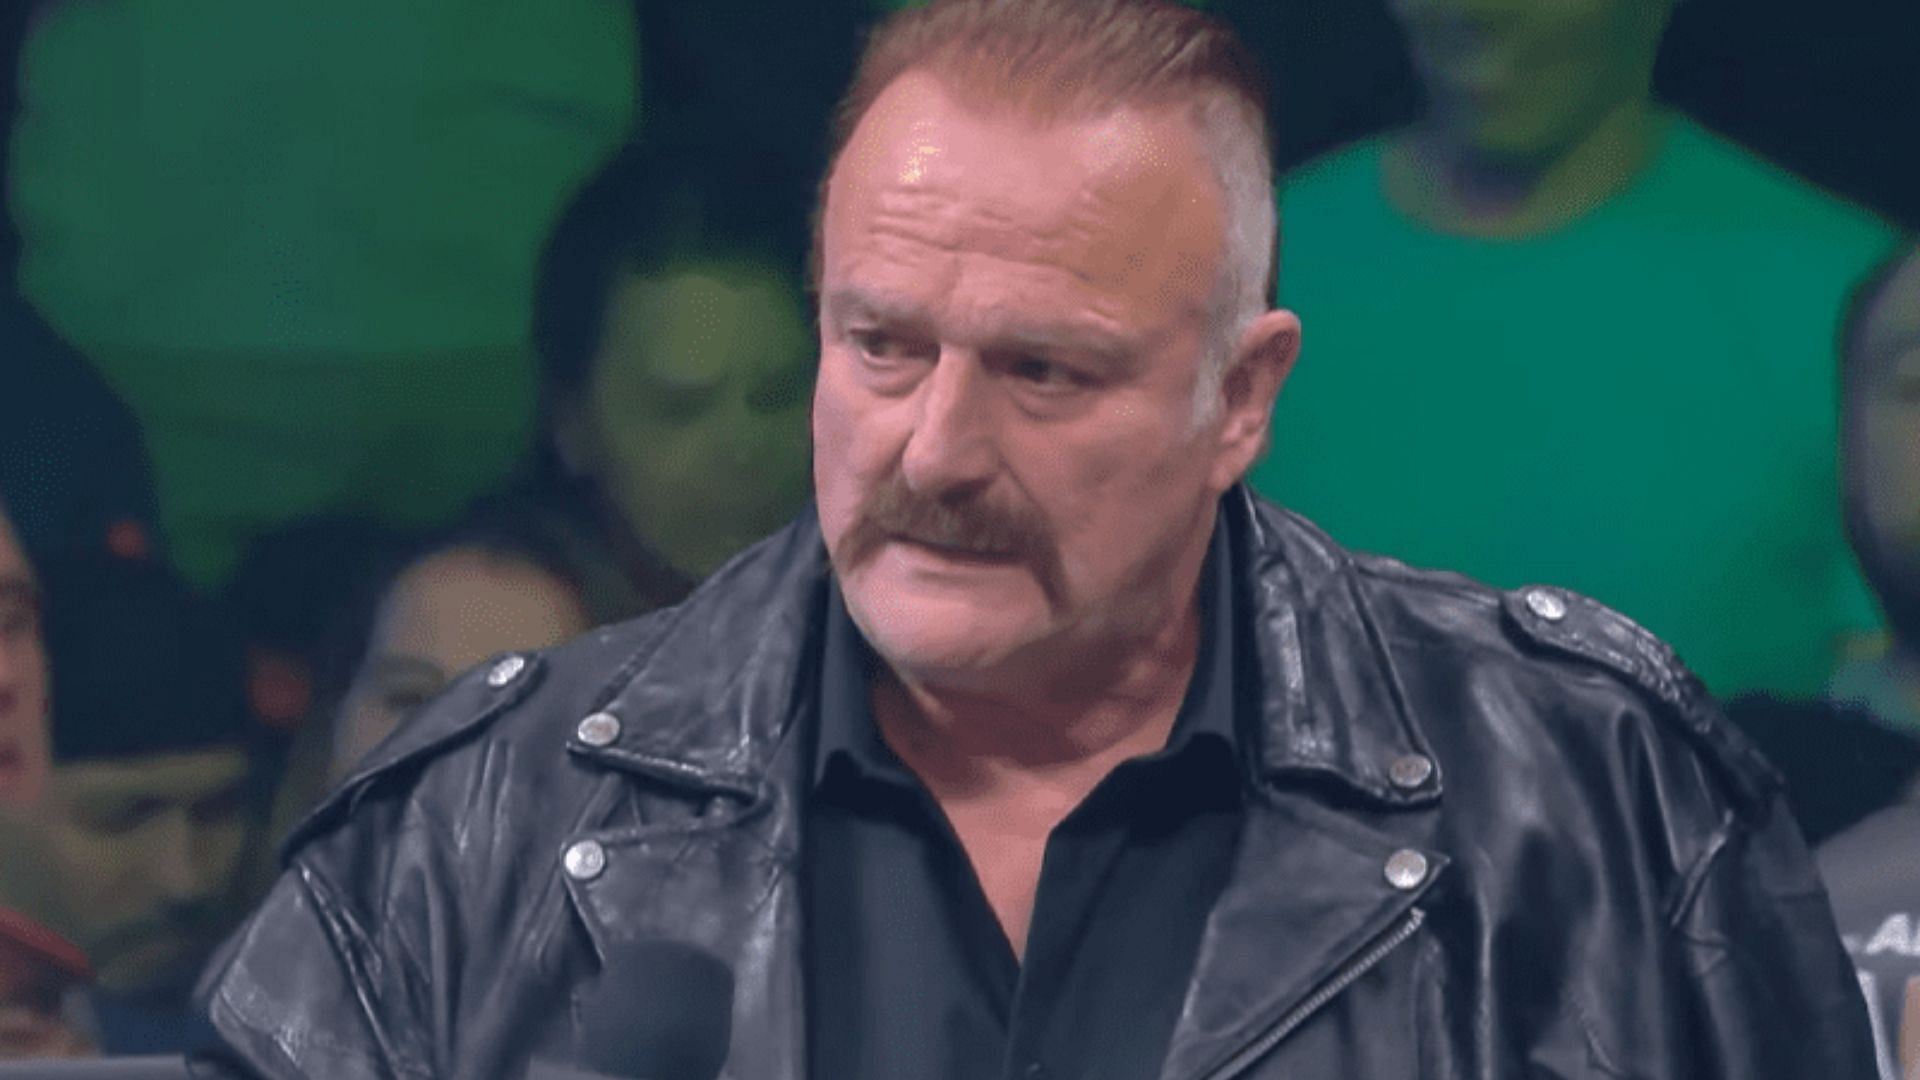 Jake Roberts was inducted in WWE Hall of Fame in 2014